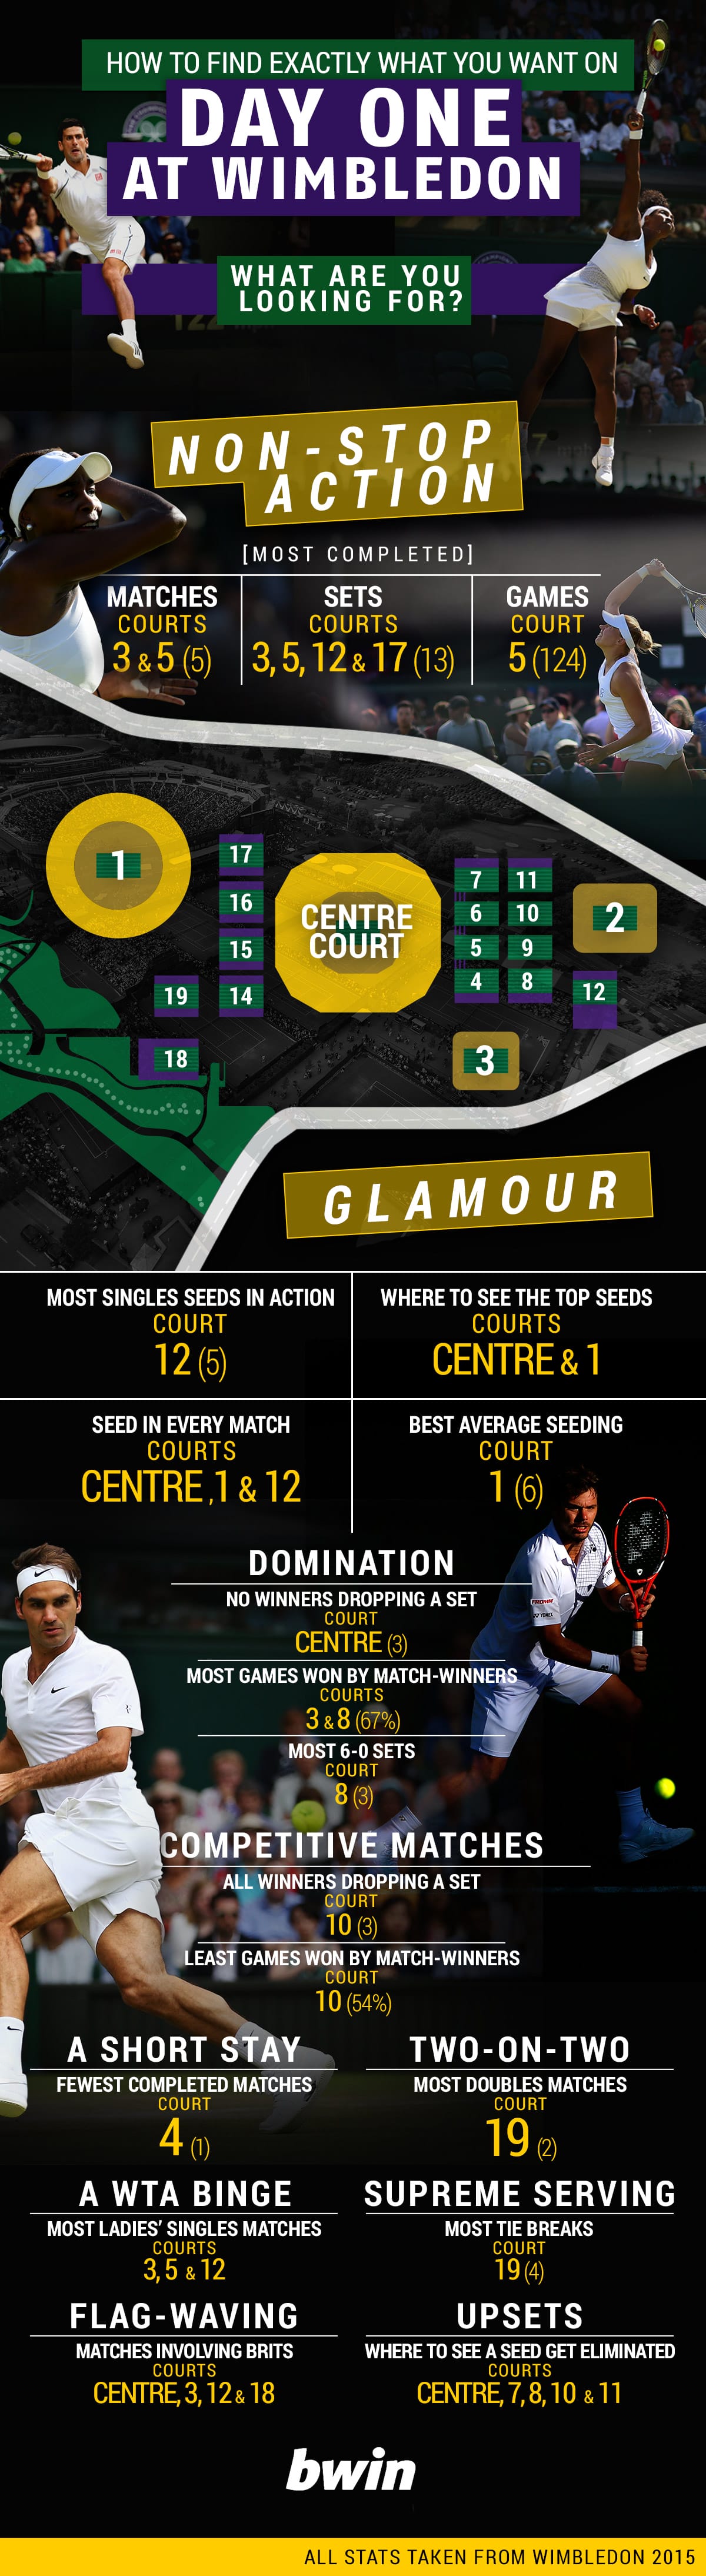 Which court should I visit at Wimbledon 2016